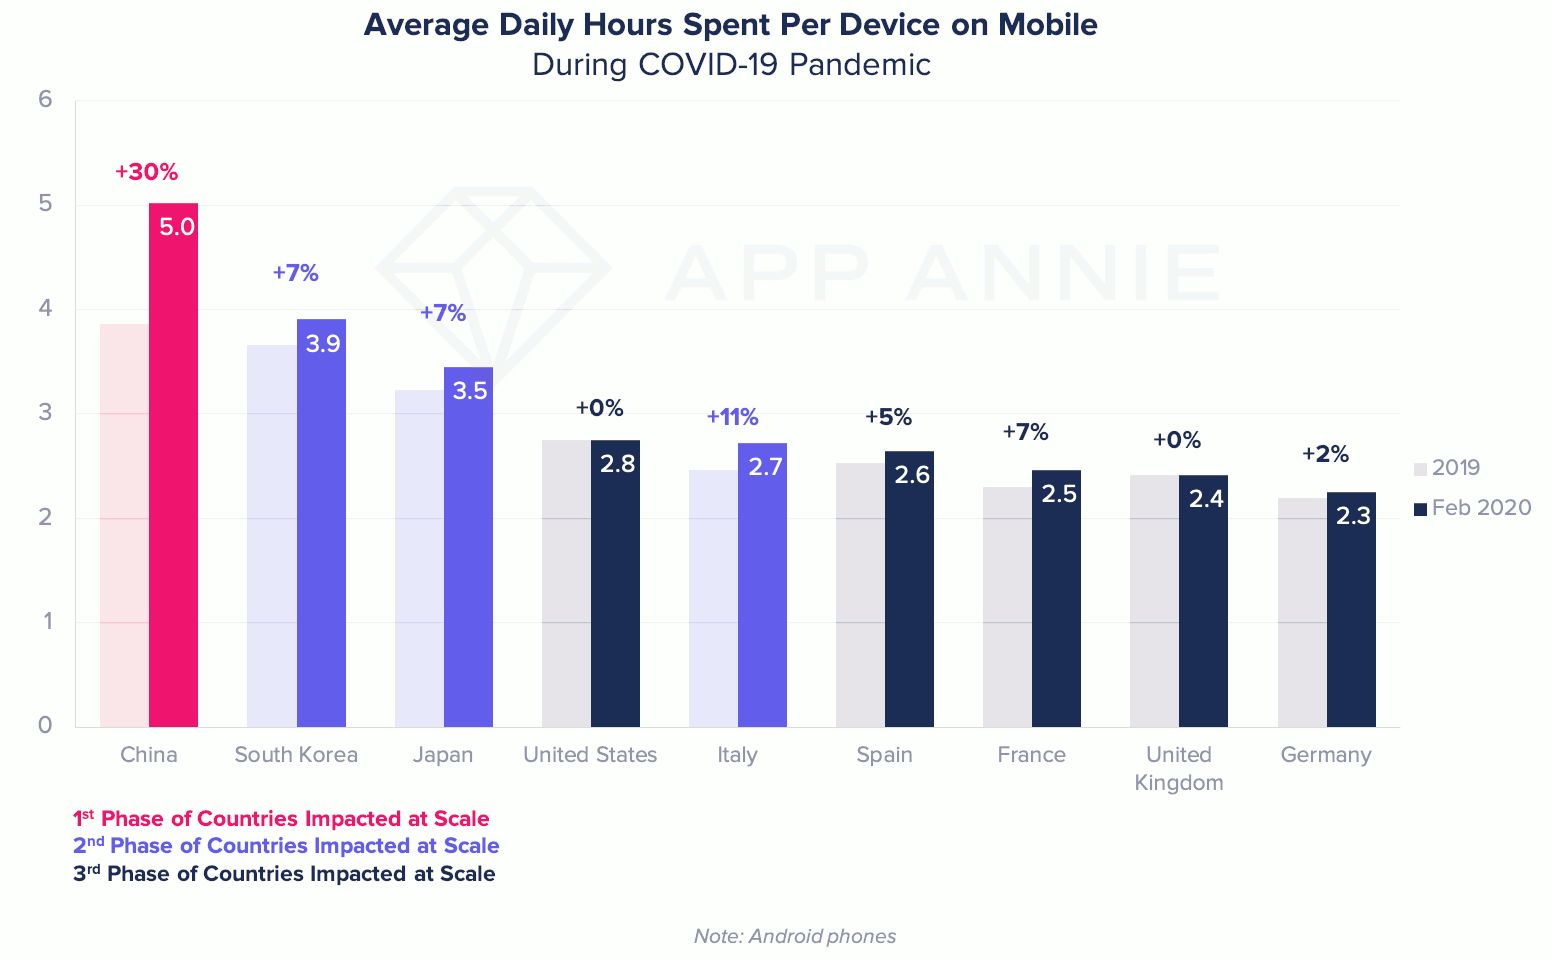 Average daily hours spent per device on mobile